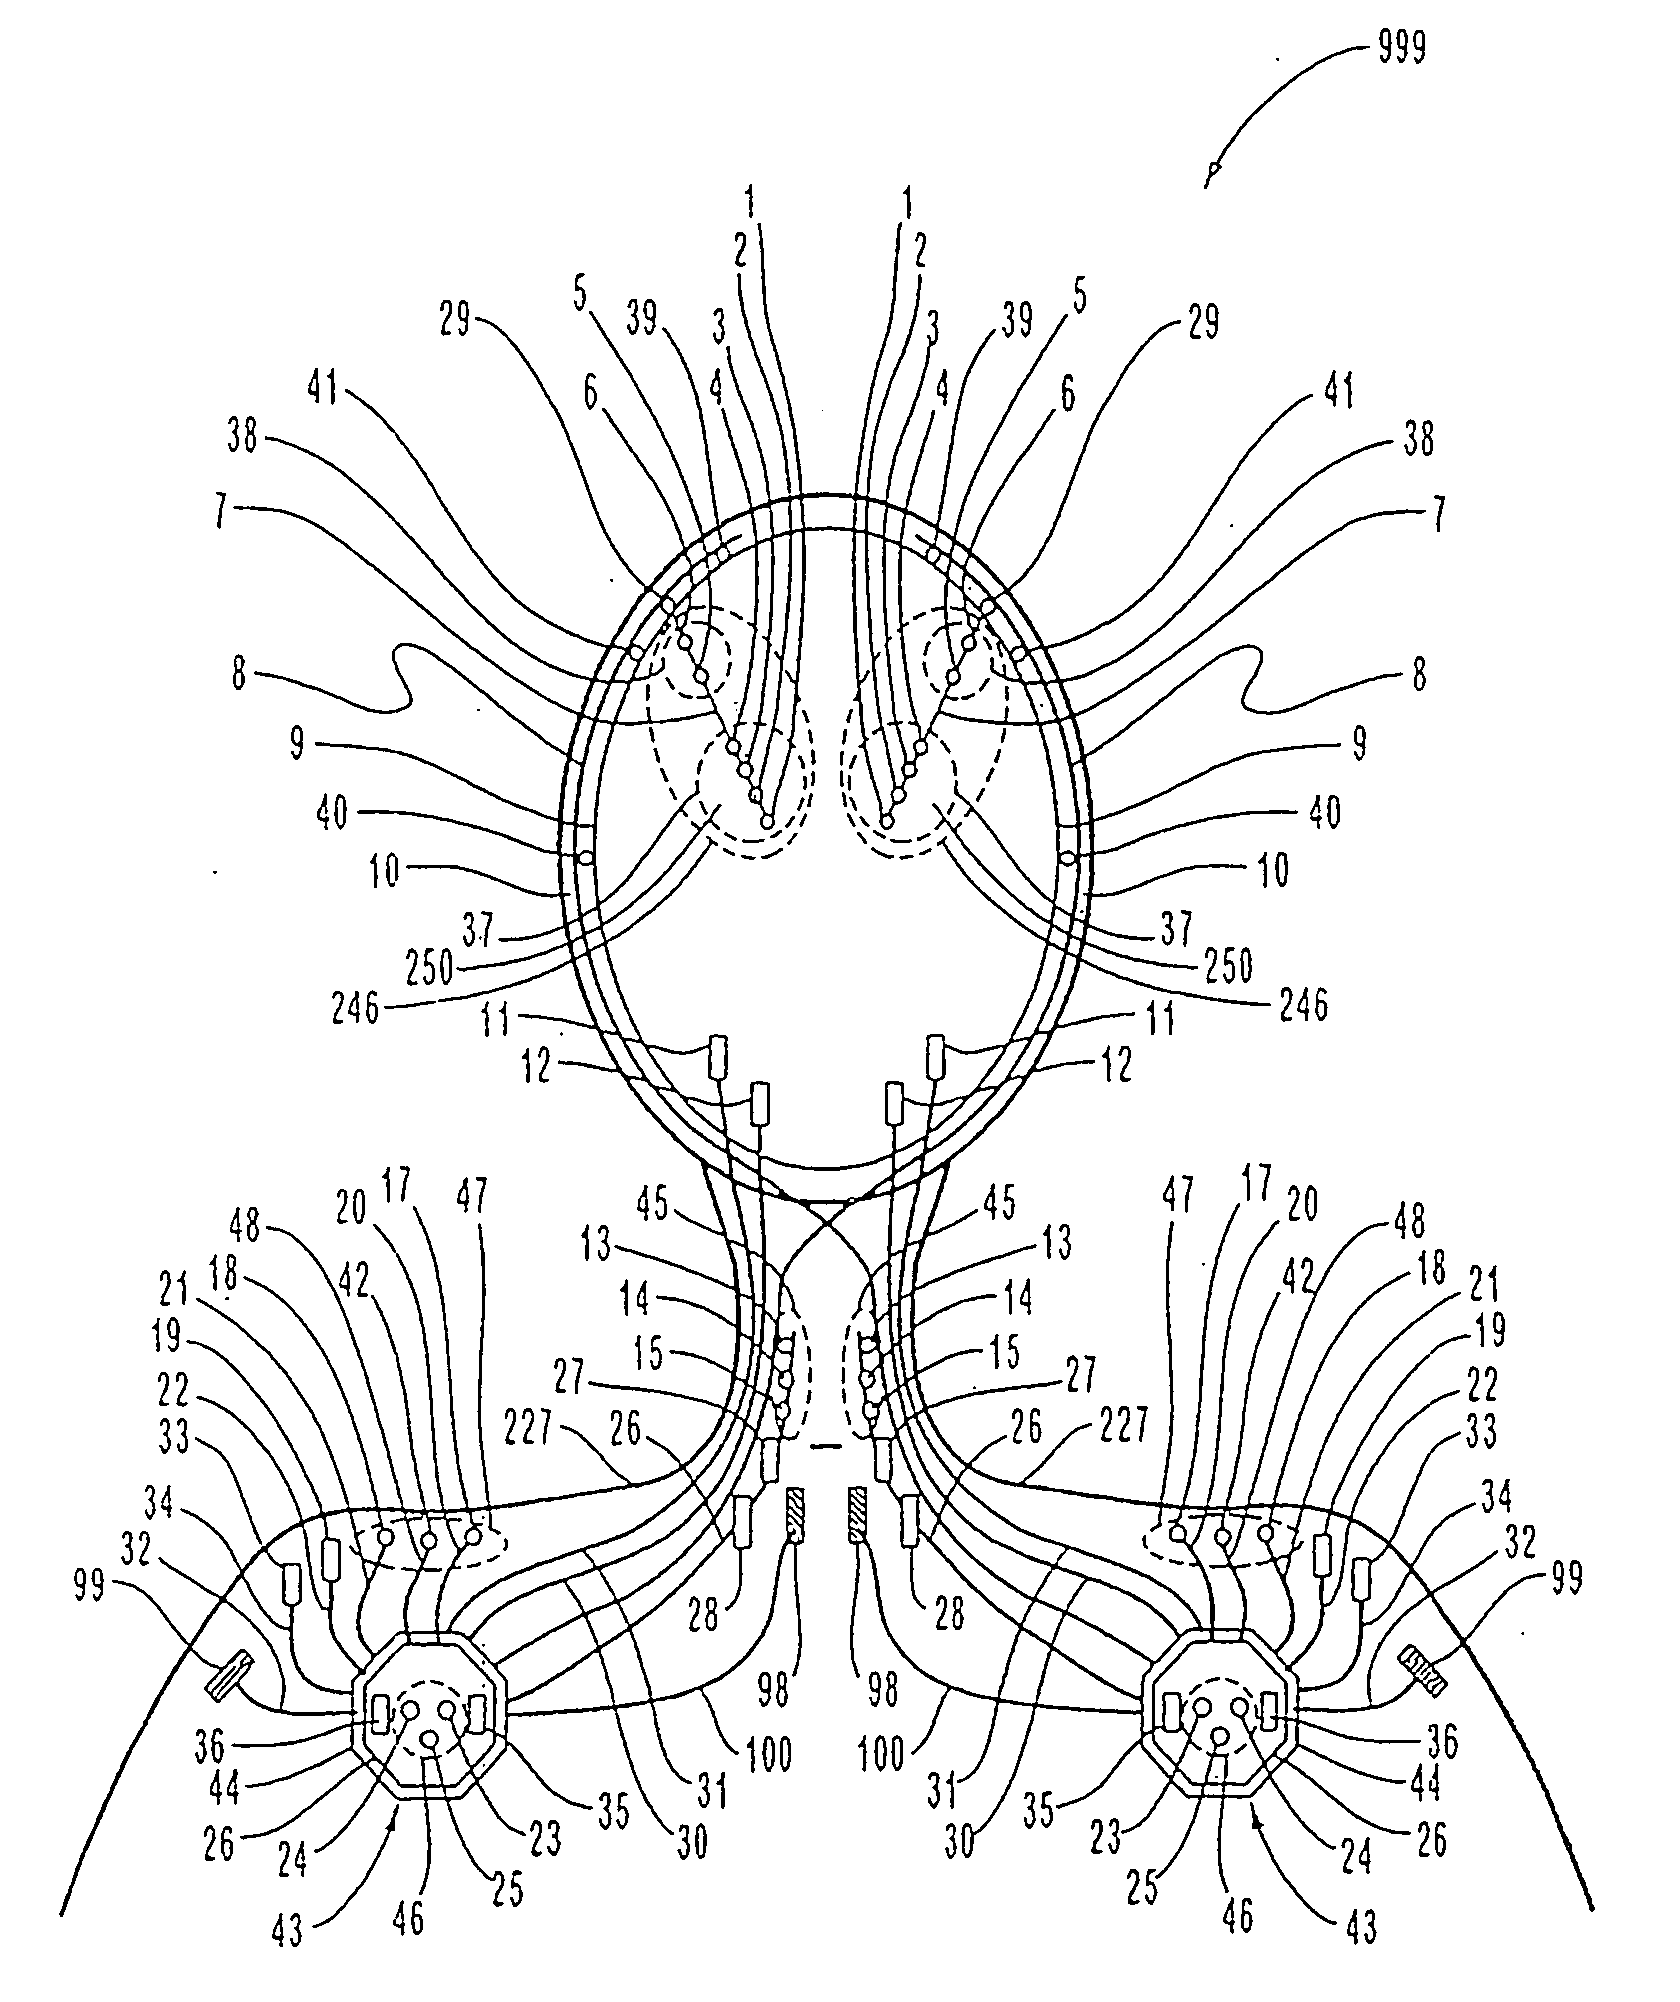 Methods and systems for continuous EEG monitoring